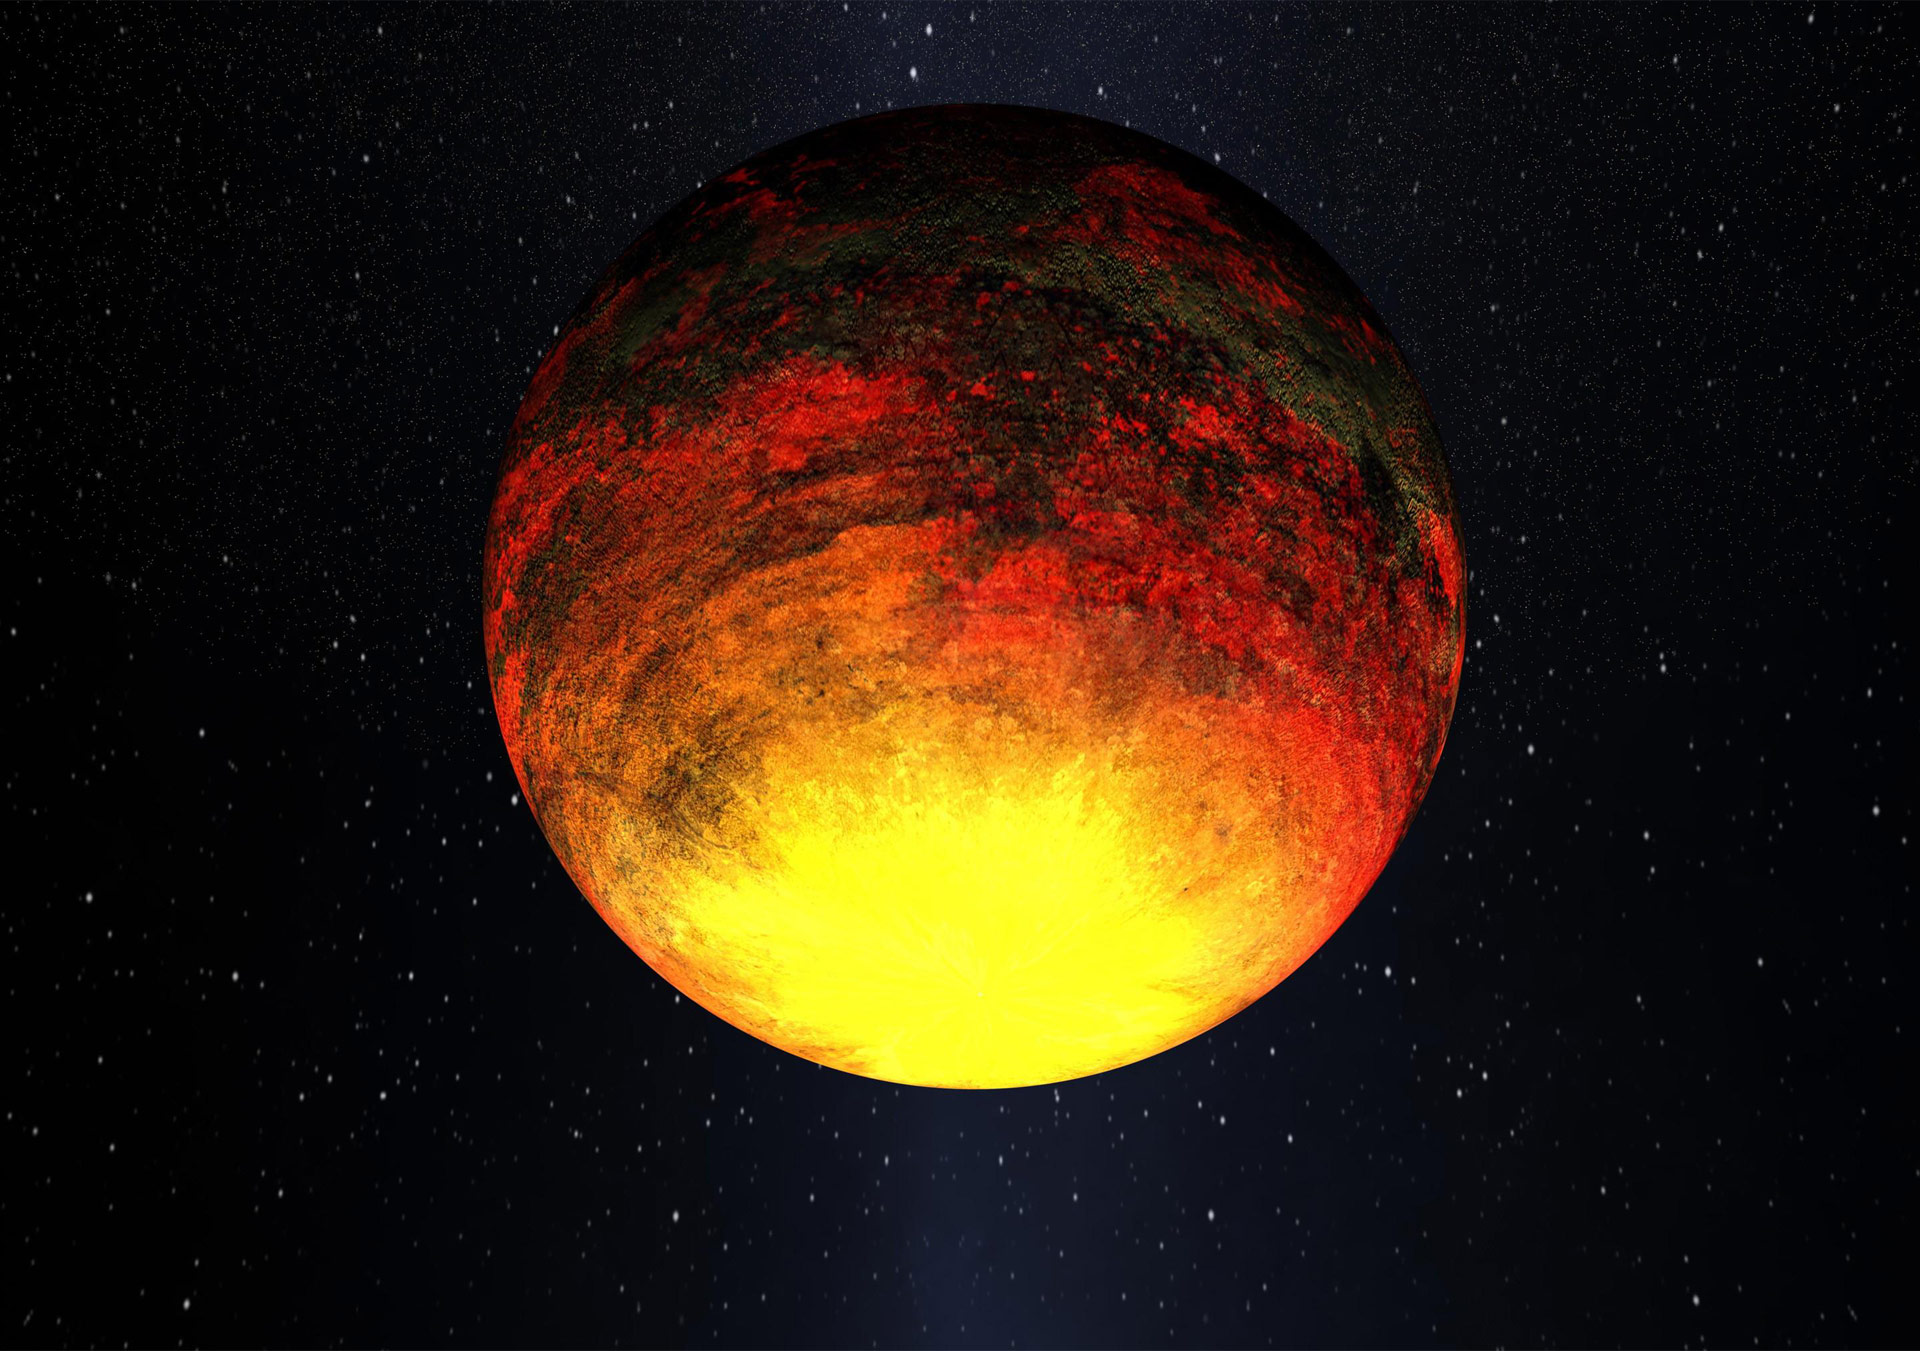 Researchers-Investigate-Exoplanet-Surfac